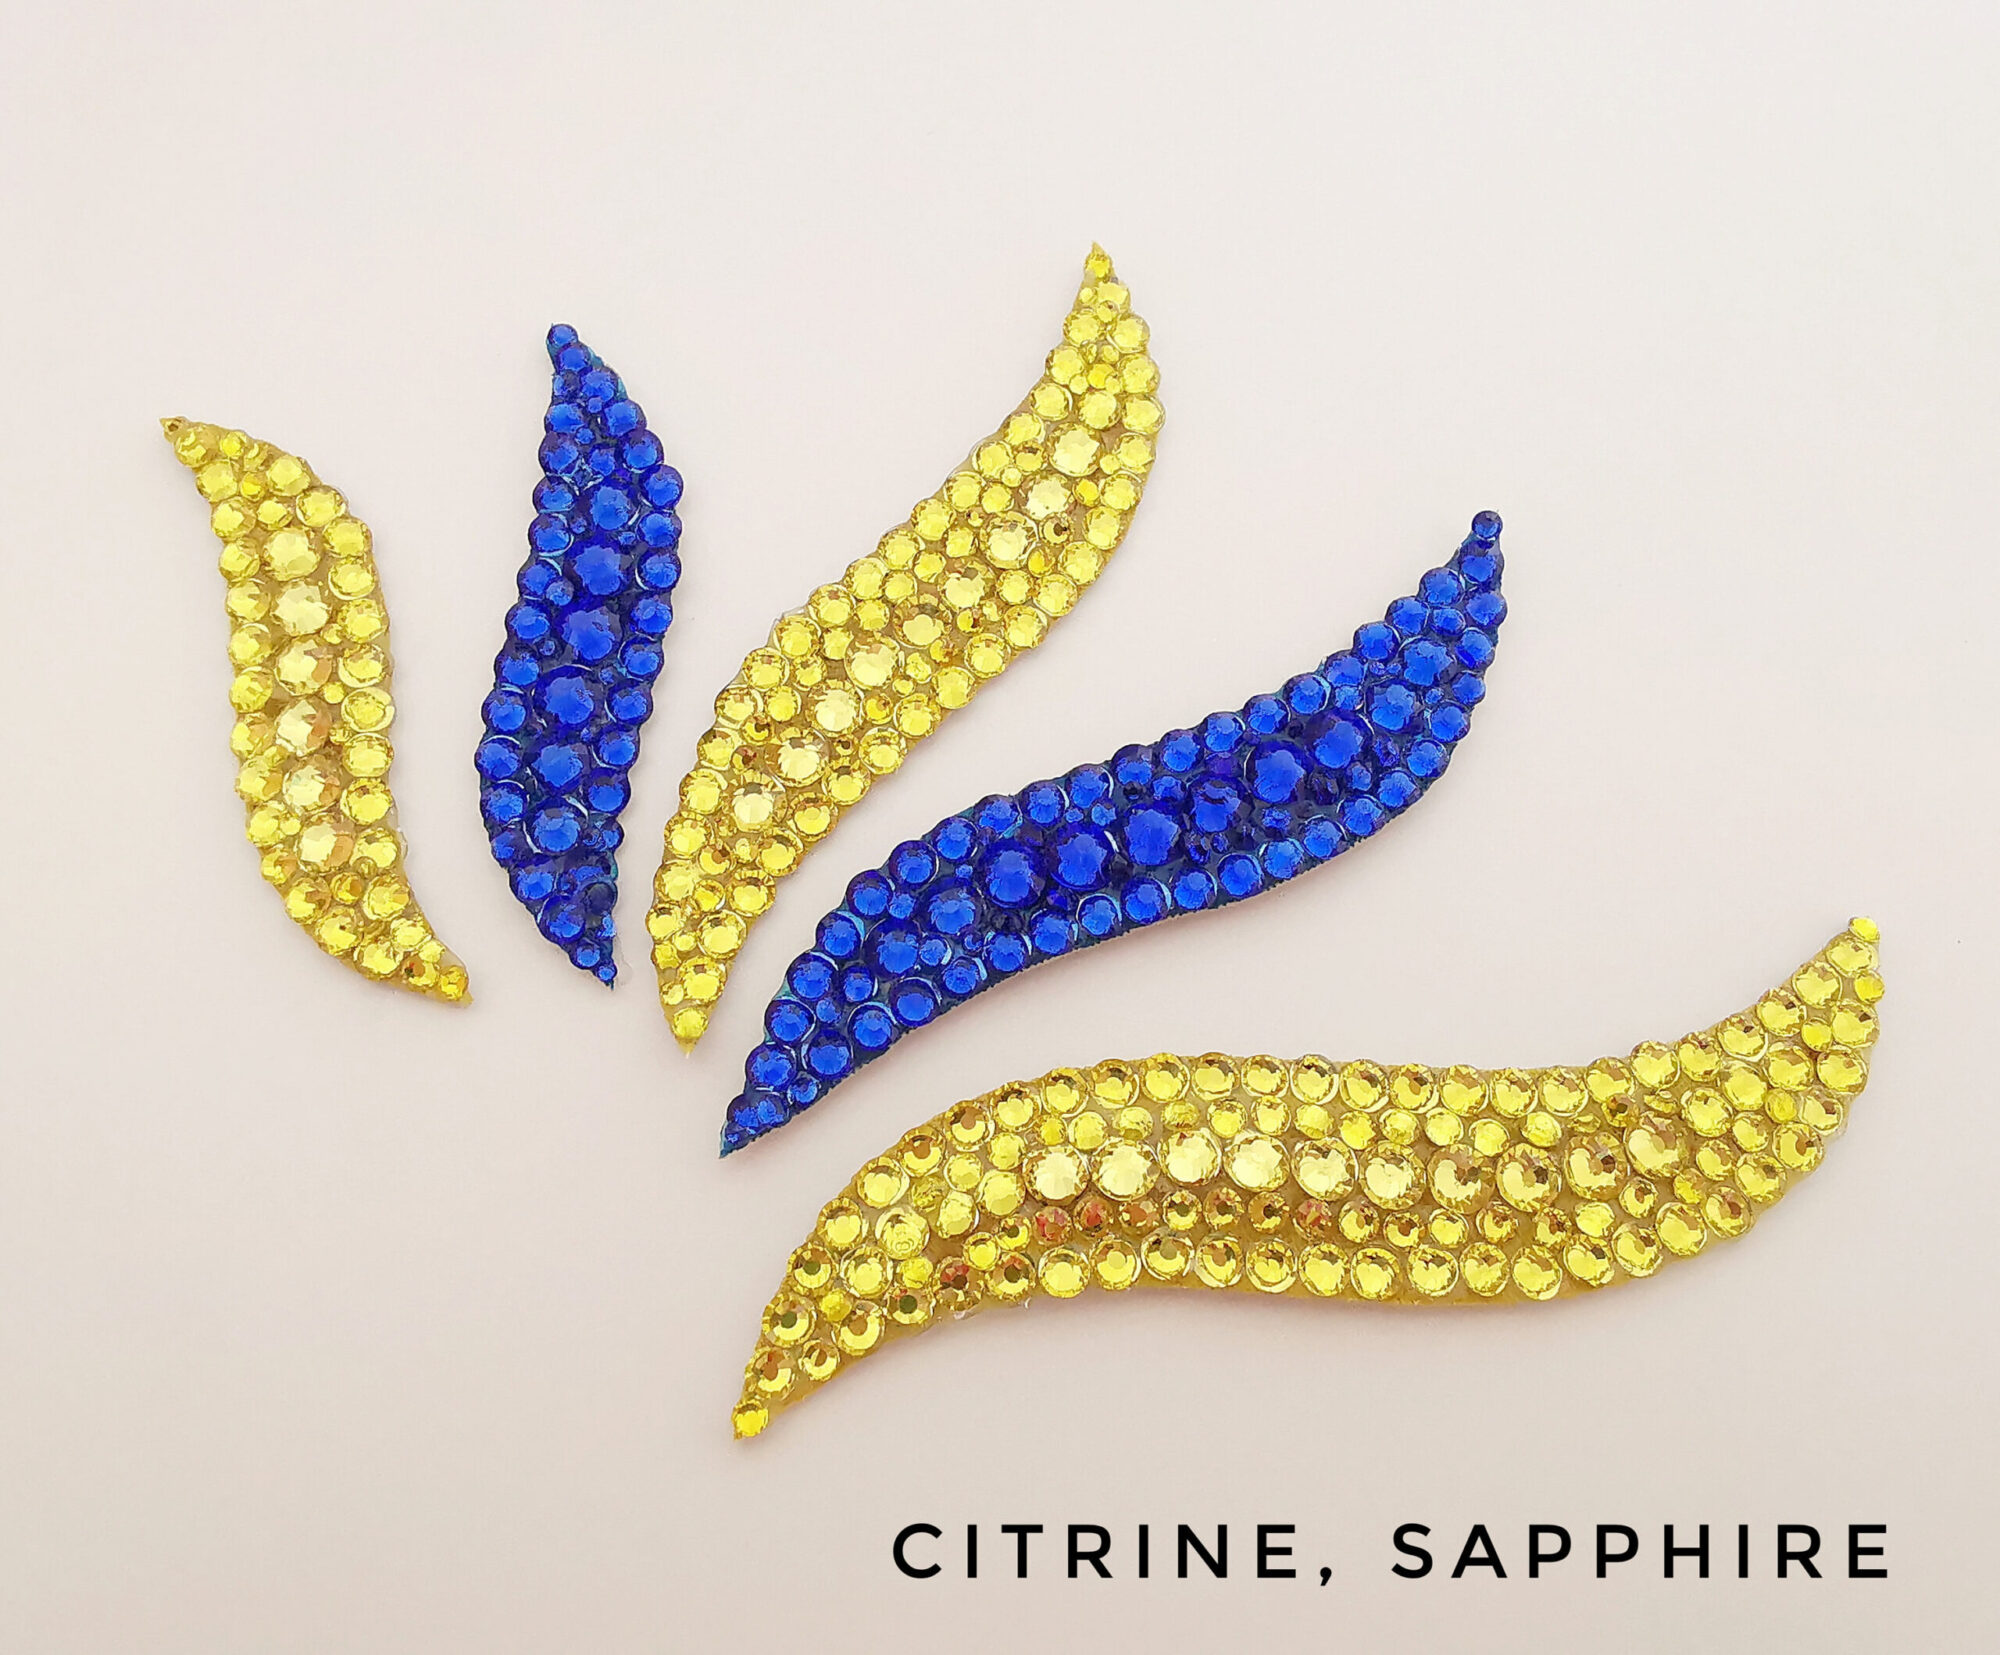 Ballroom hairpiece with yellow and blue rhinestones